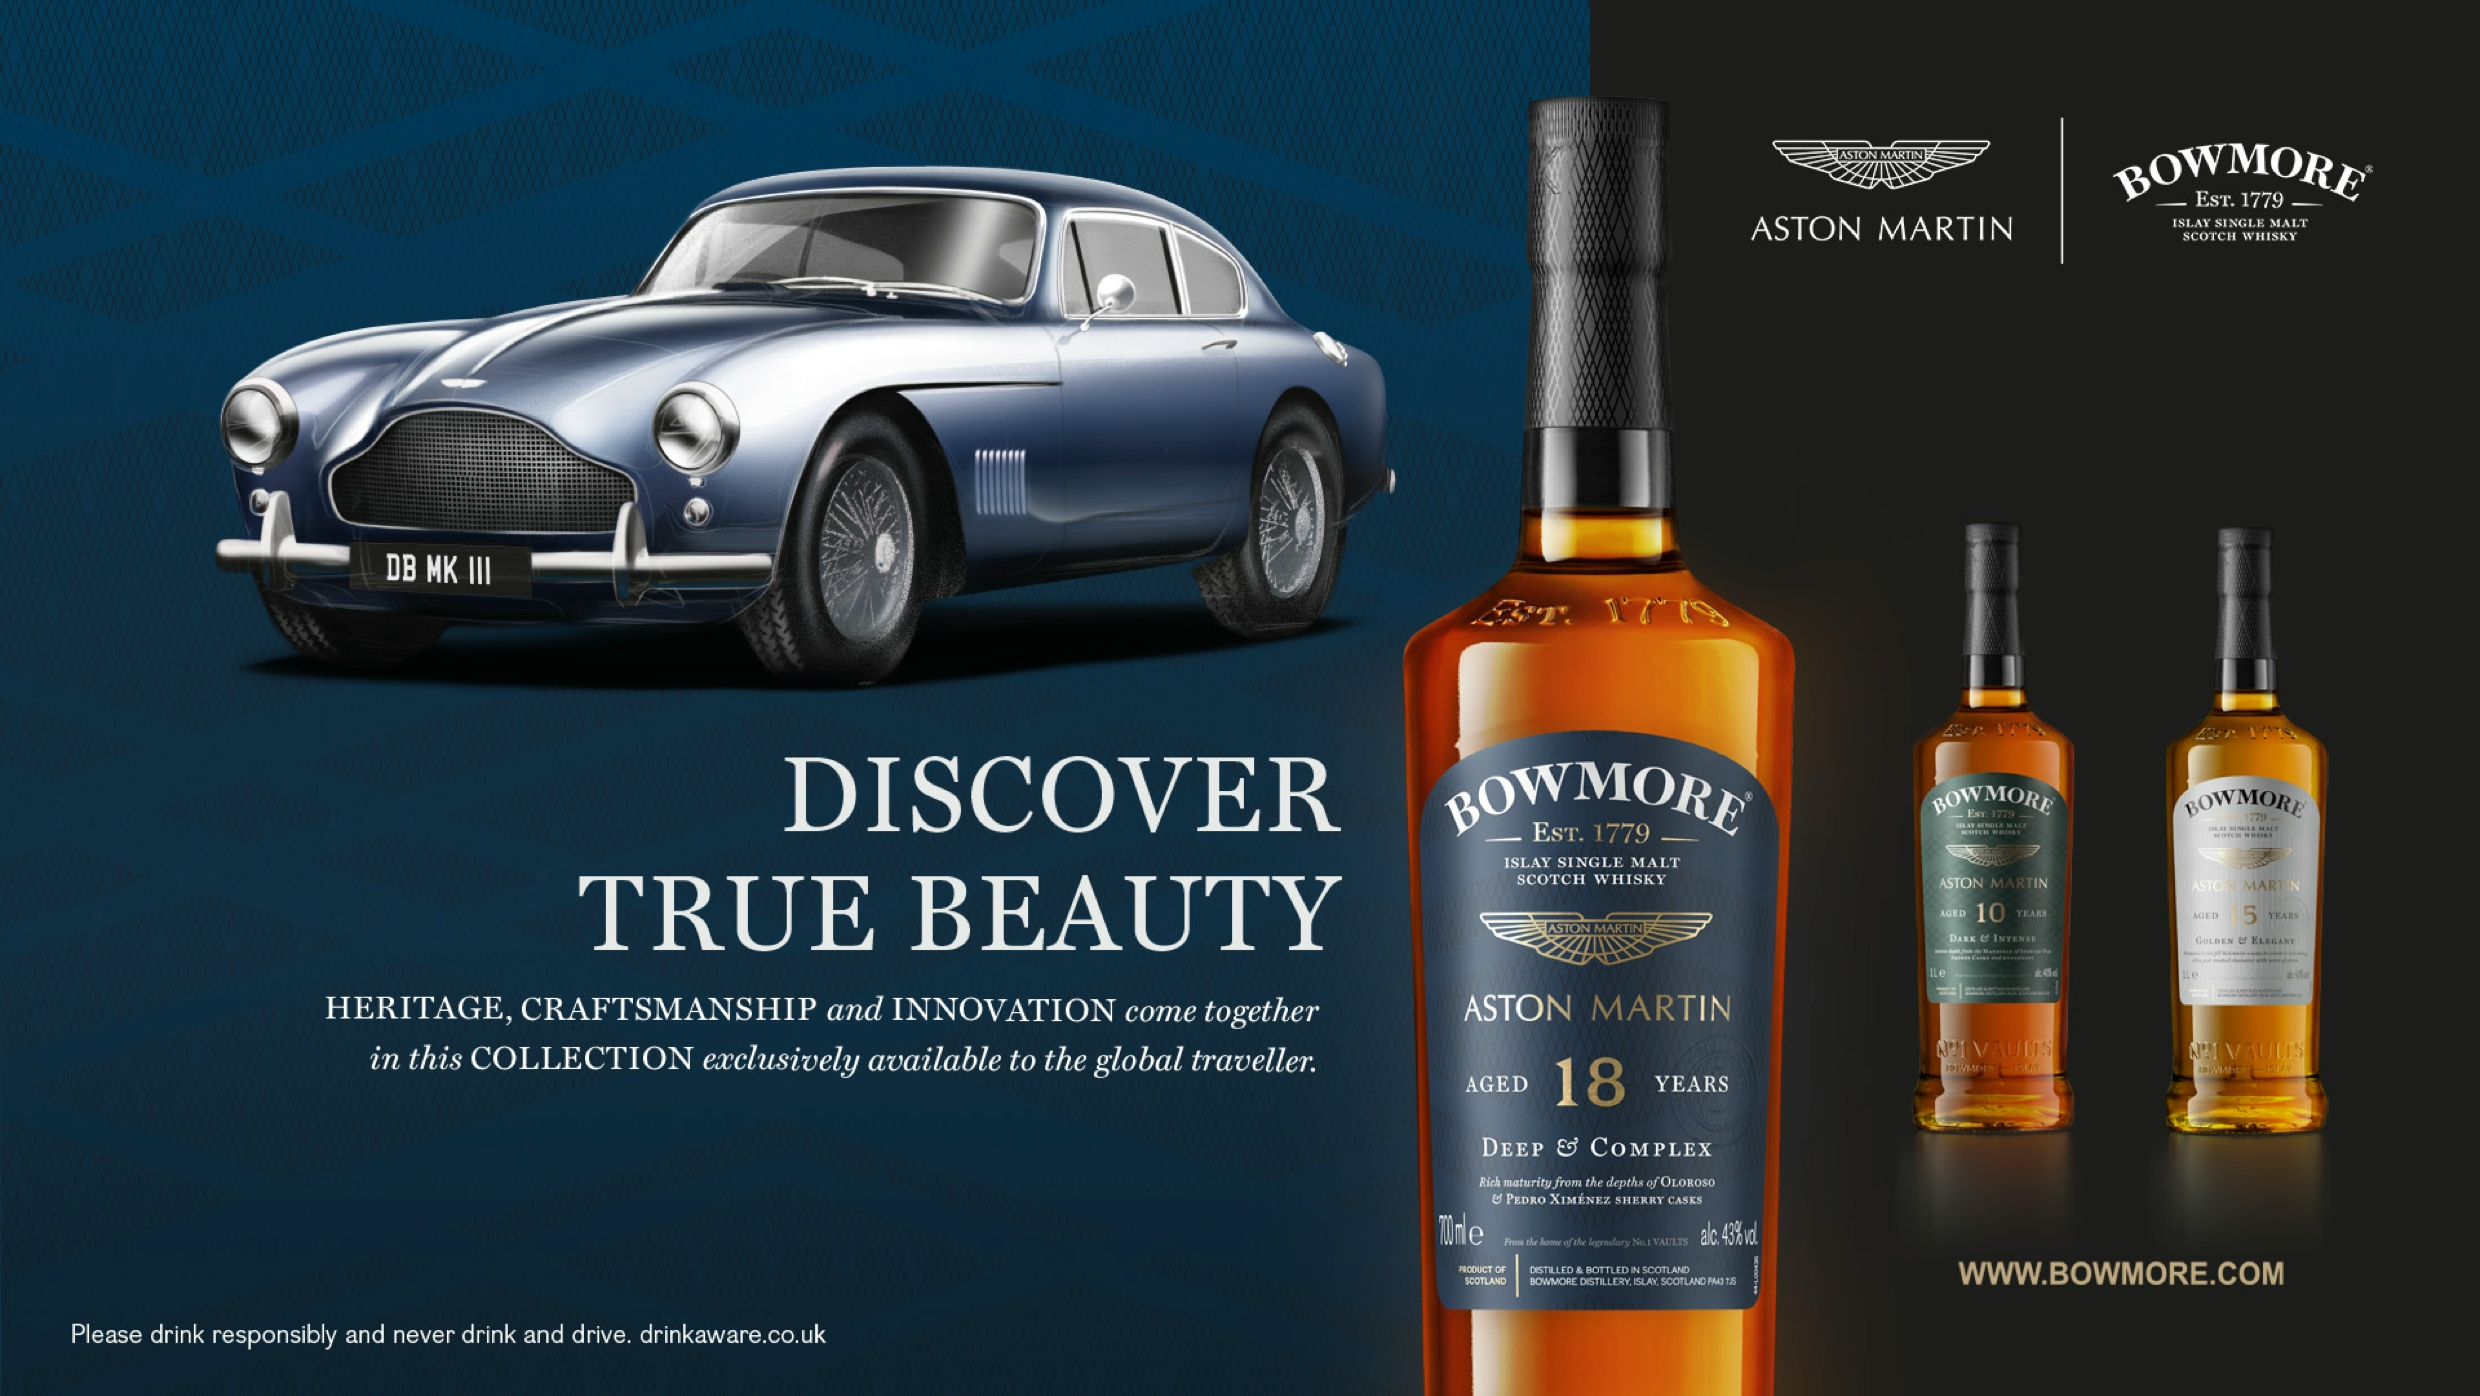 A classic Aston Martin Atom car showcases the Bowmore Aston Martin 15 year old whisky bottle in this print image created by More Yum. "DISCOVER TRUE BEAUTY: Heritage craftsmanship and innovation come together in this collection exclusively available to the global traveler". You can discover more at www.bowmore.com